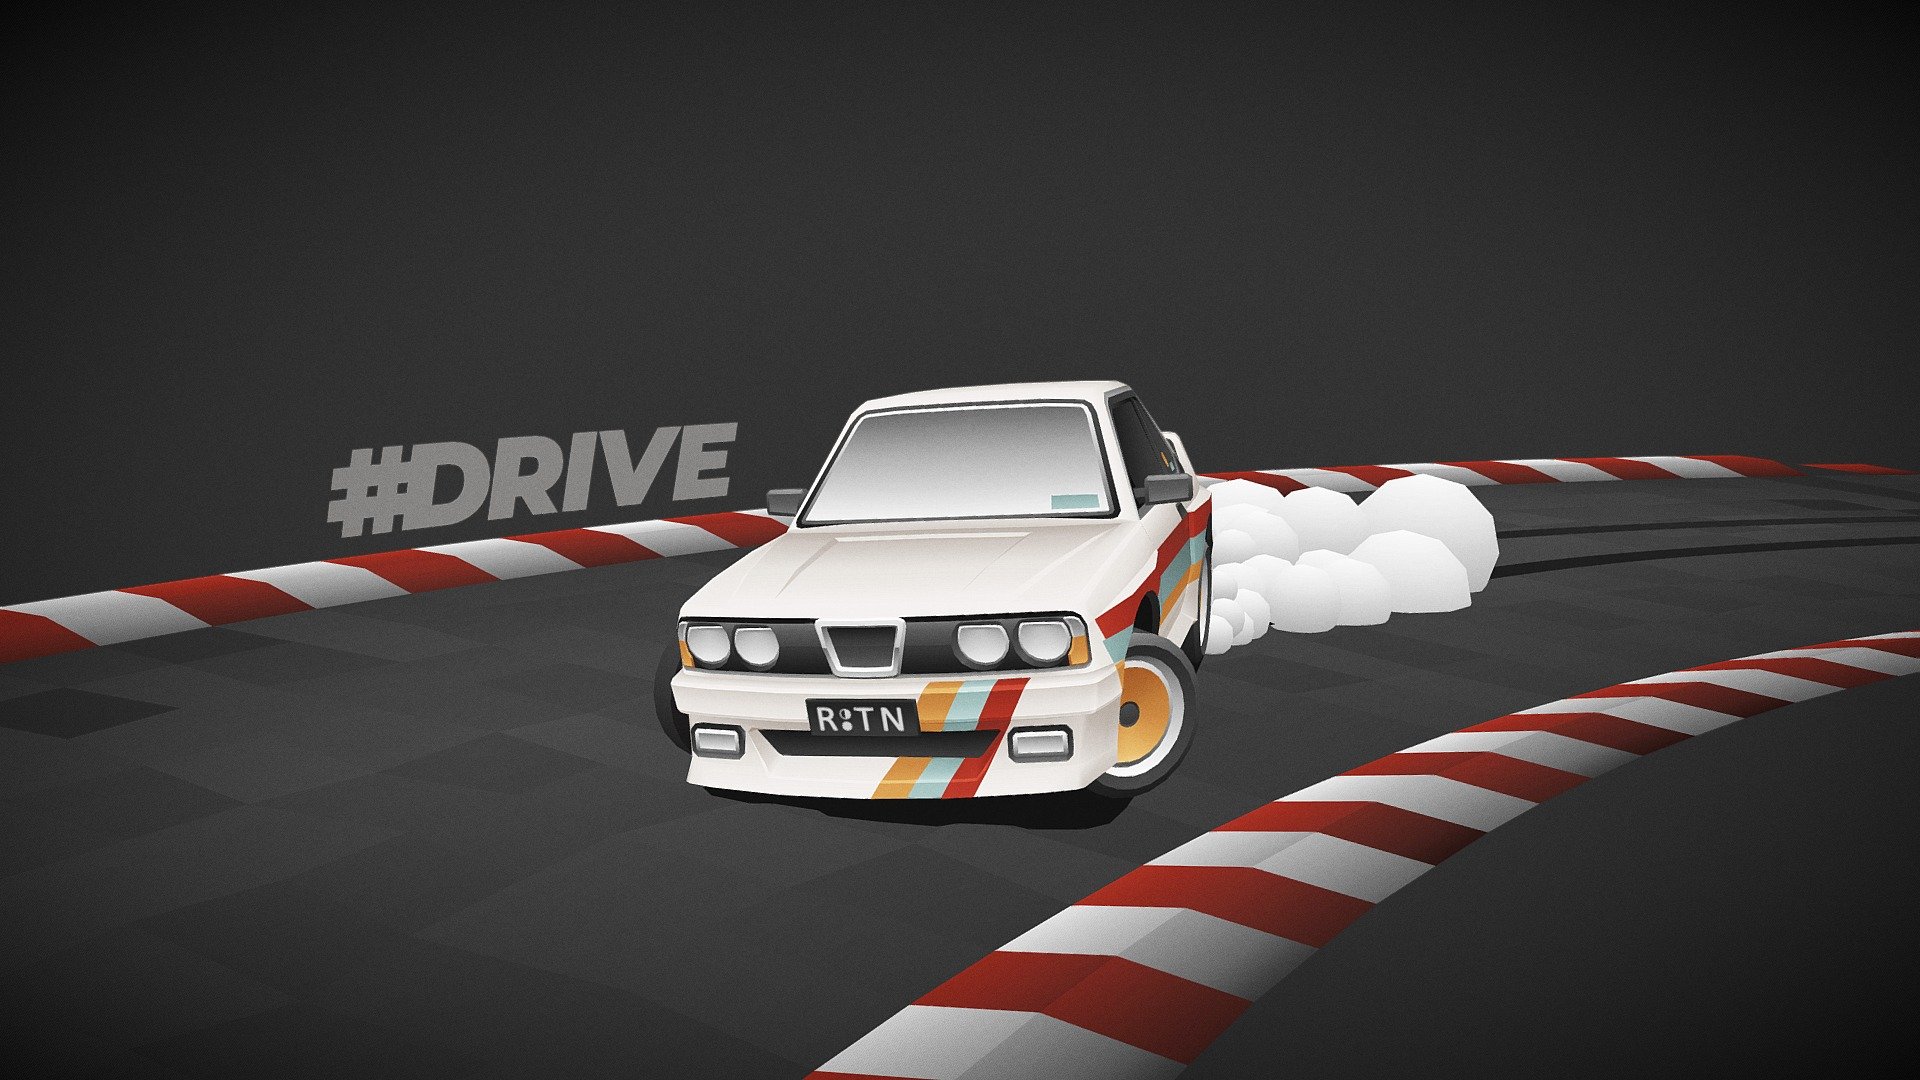 Das Bretzel from #DRIVE.

Available now on Google Play: https://play.google.com/store/apps/details?id=com.pixelperfectdude.htdrive

#DRIVE is an endless driving videogame inspired by road and action movies from 1970s. As simple as possible, allowing the player to pick a car, pick the place and just hit the road. Just be aware not to hit anything else.

Follow us on:
Facebook: http://fb.com/drive.game/
Instagram: http://instagram.com/drive.game
Twitter: http://twitter.com/drivethegame

© Pixel Perfect Dude &amp; Lionsharp Studios 2019 - #DRIVE - Das Bretzel - 3D model by Marf_ (@marf-fso) 3d model